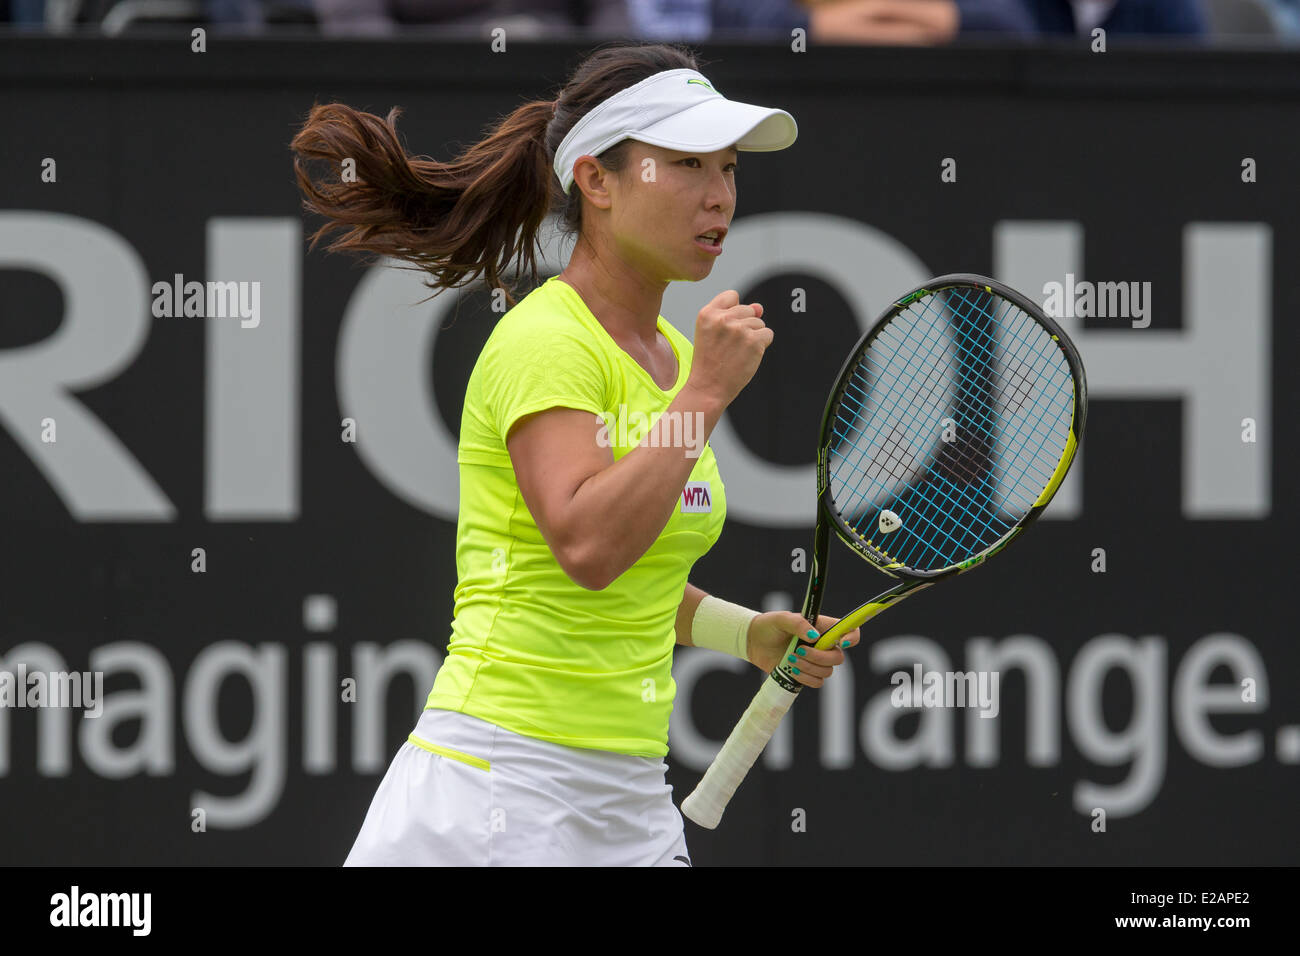 Rosmalen, The Netherlands. 18th June, 2014. Chinese tennis player Jie Zheng reacts during the 2nd round singles match of the Topshelf Open 2014 at Autotron, Rosmalen, Netherlands on 18.06.2014. She won against Carla Suarez Navarro (ESP) who had to retire at 7:5 0:1 due to back problems.  Credit:  Janine Lang/Alamy Live News Stock Photo